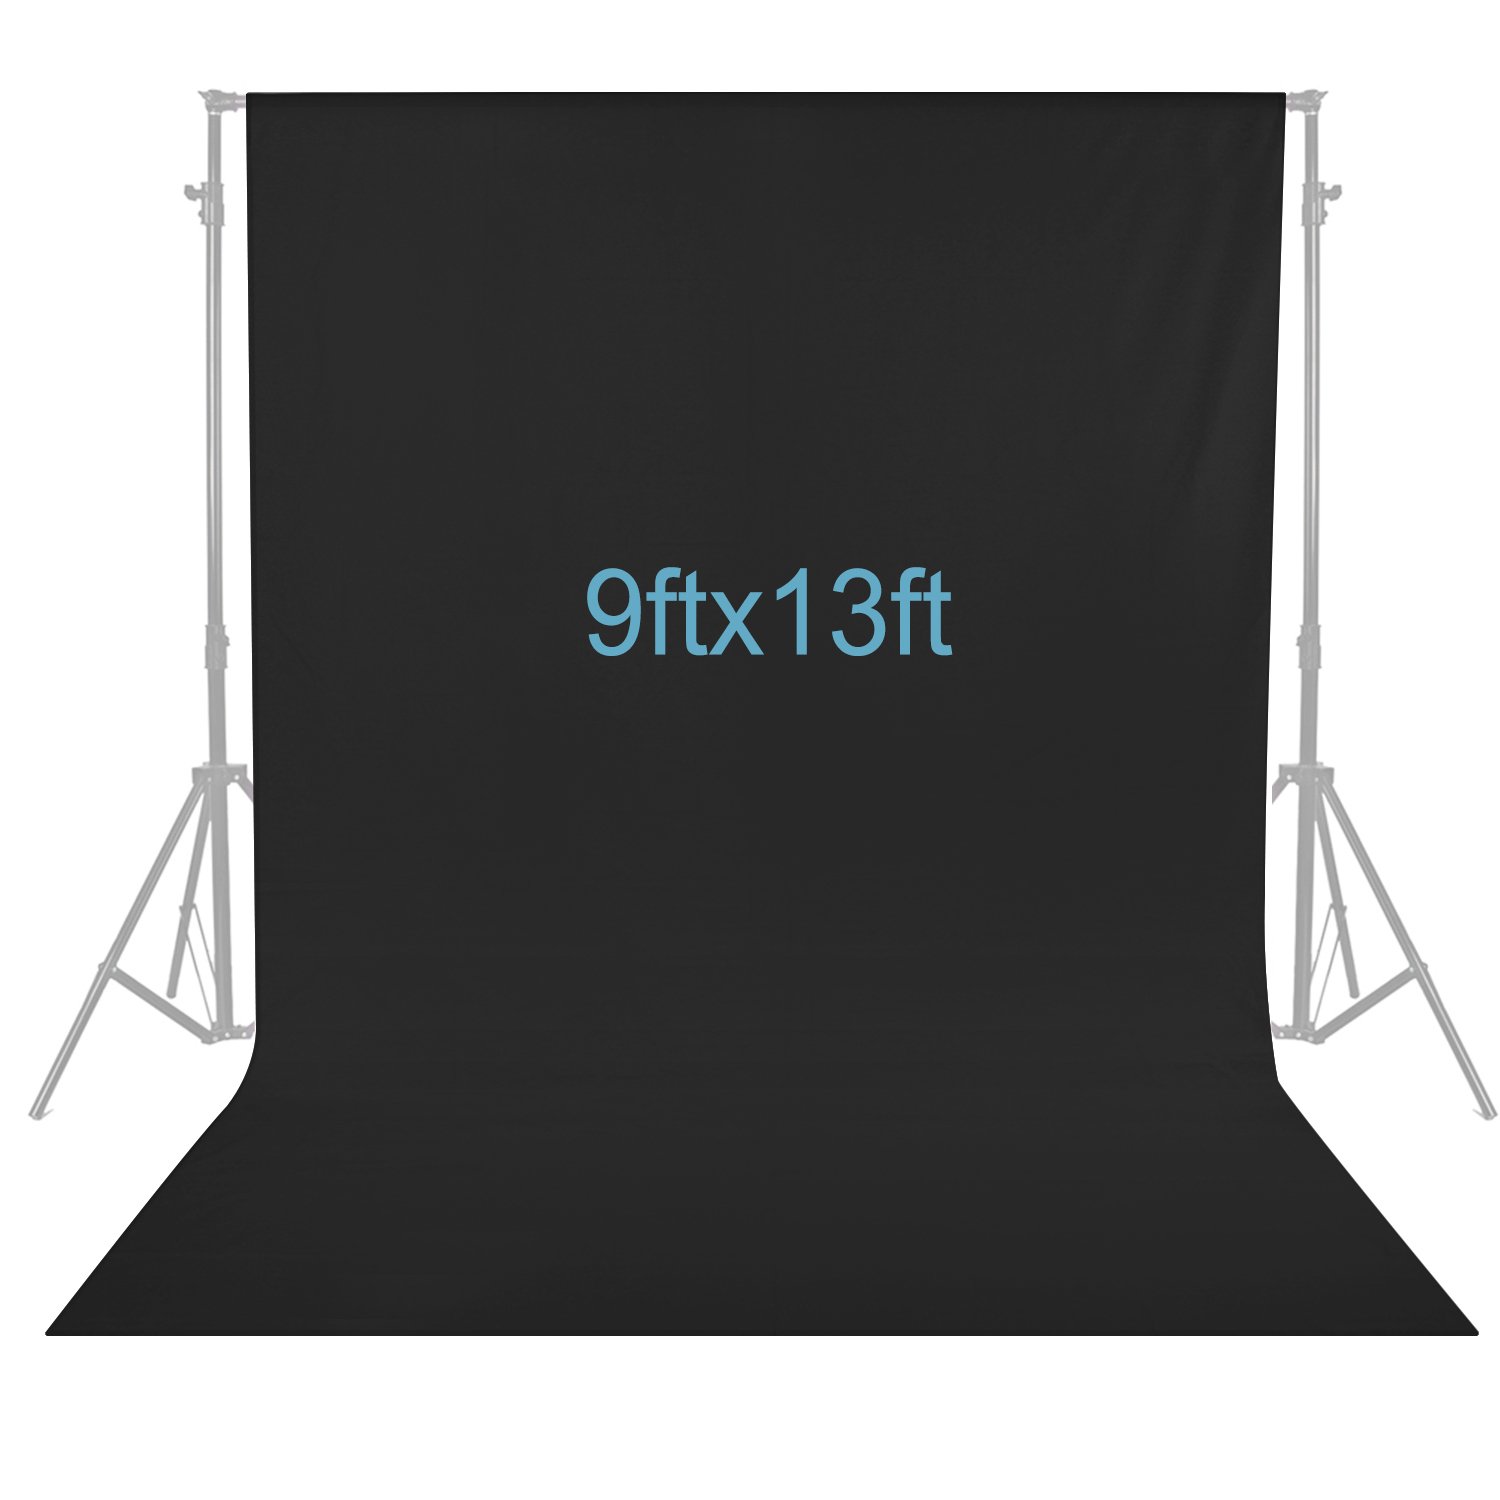 SJOLOON 6x9FT White Studio Photography Backdrop Collapsible Backdrop Muslin Backdrop for Television Video Photography 